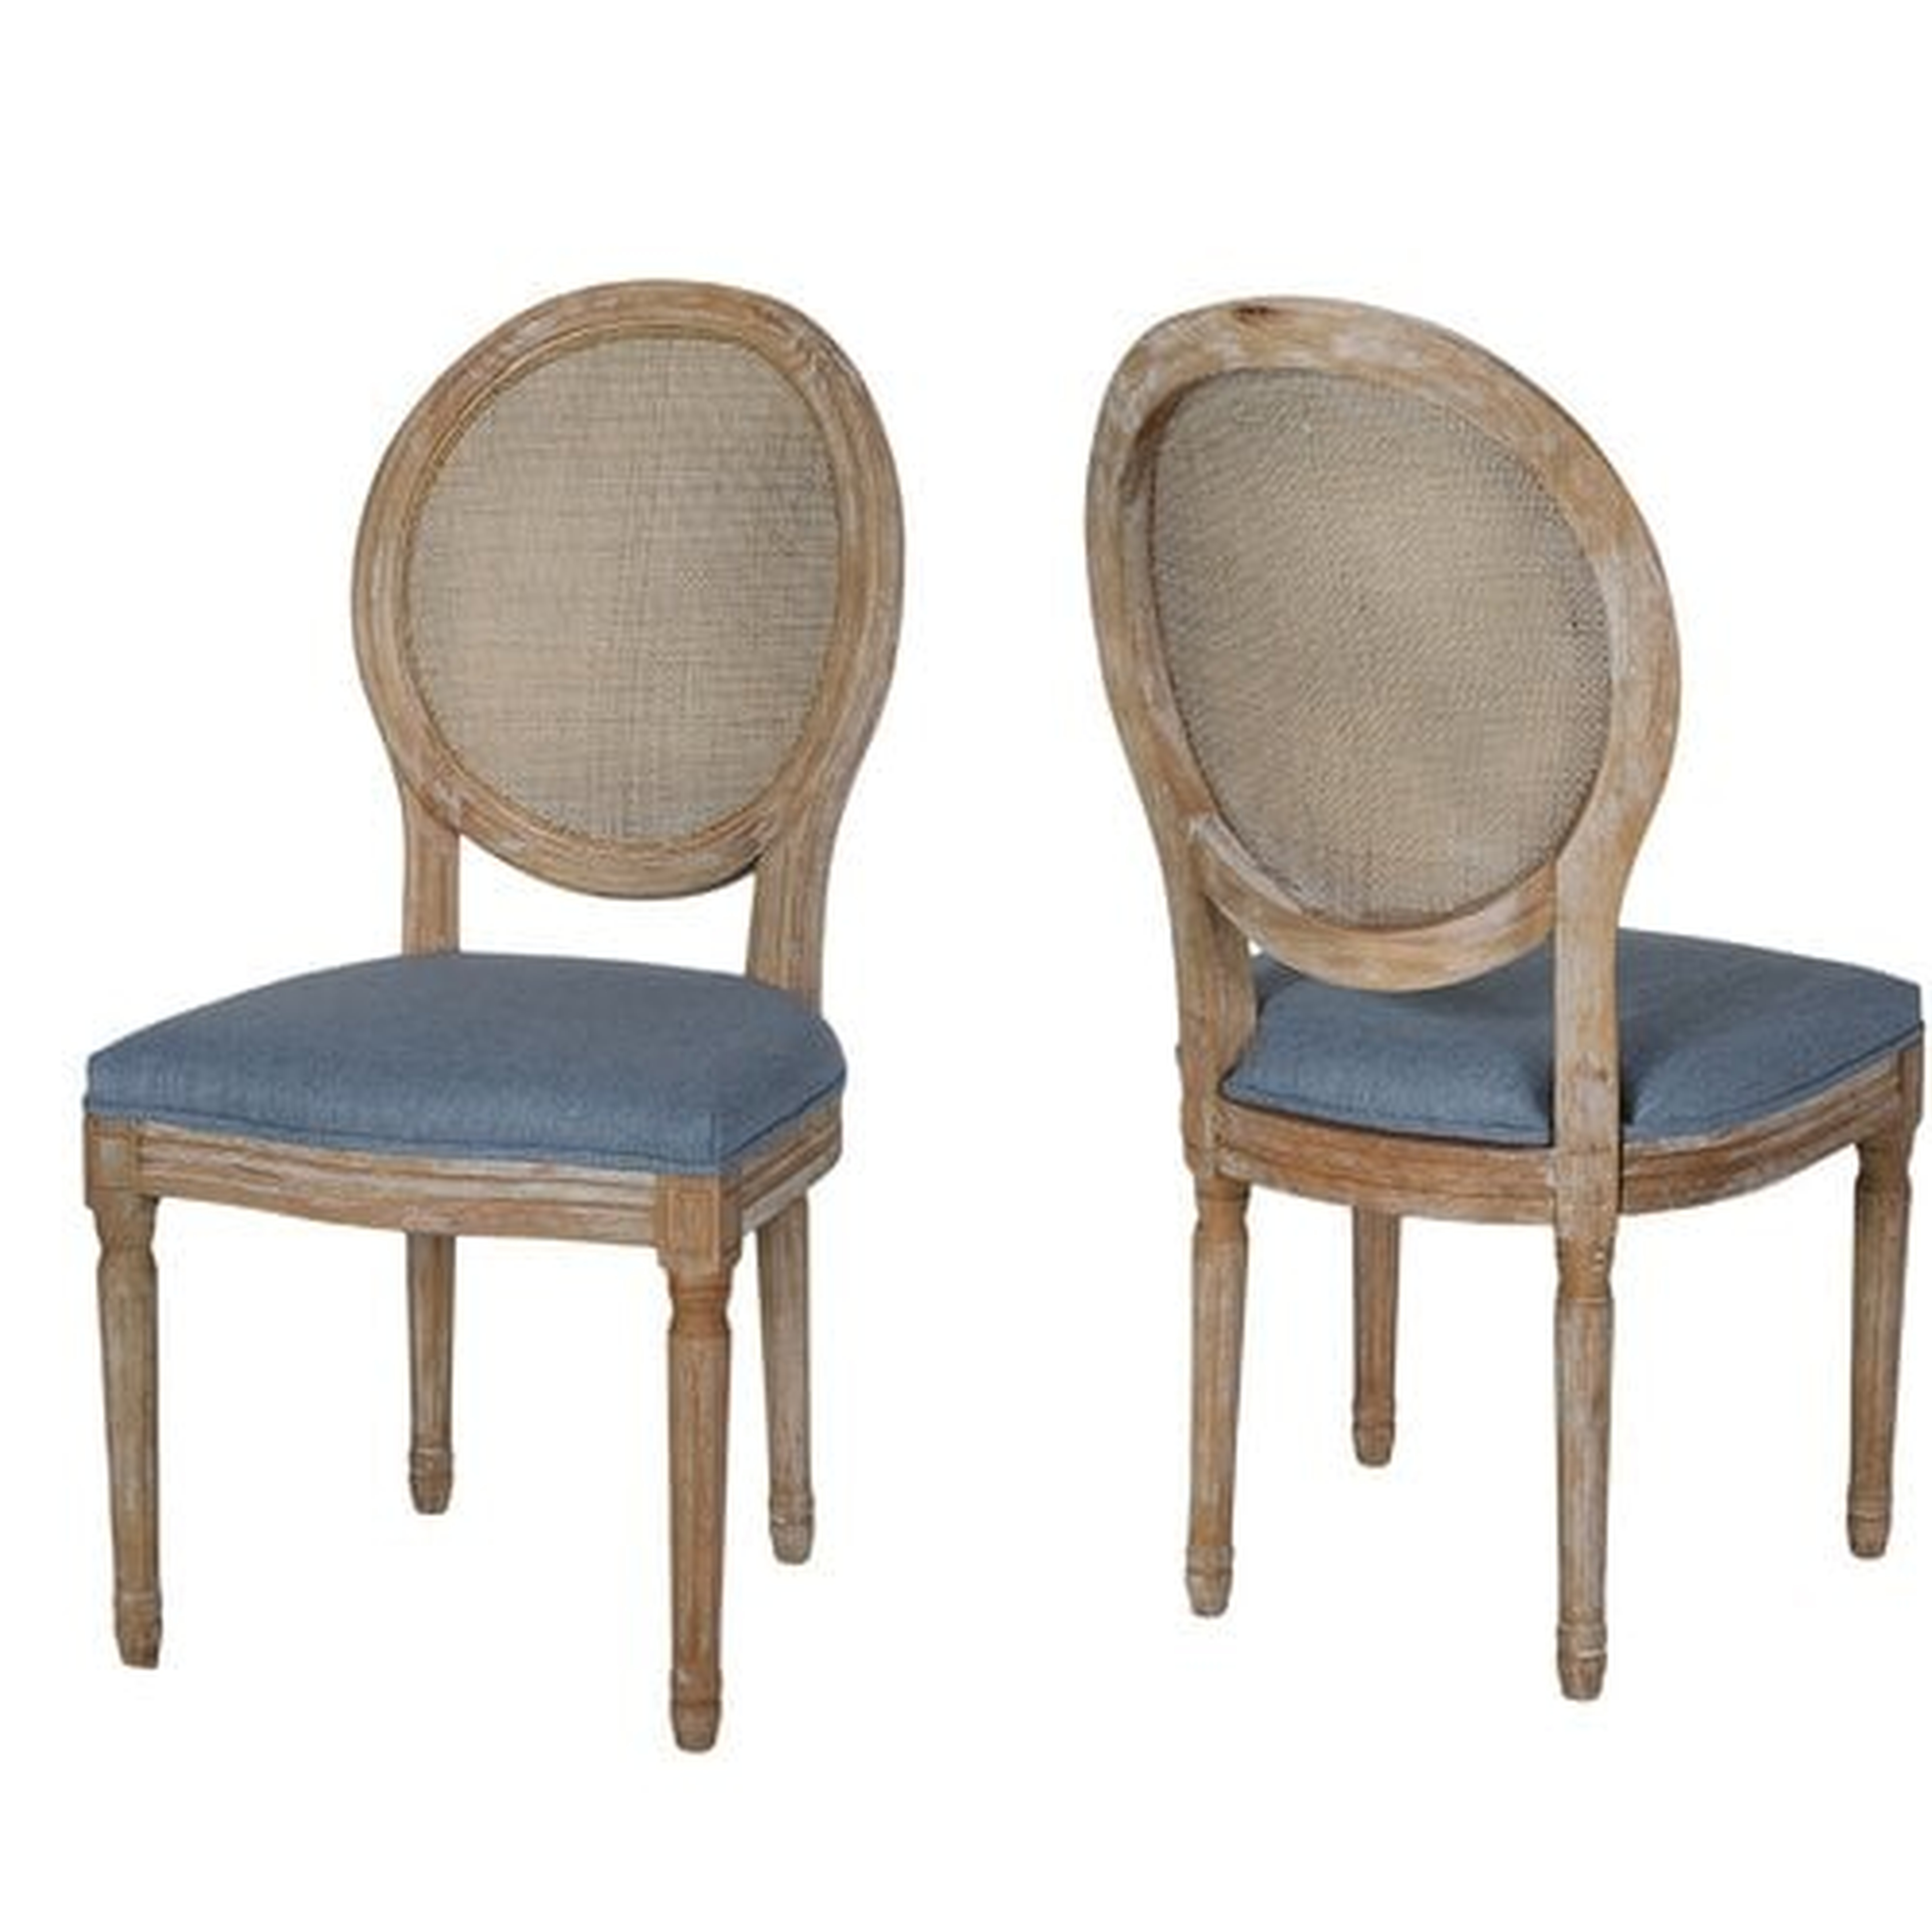 Evelina Solid Wood Dining Chair - Set of 2 - Wayfair